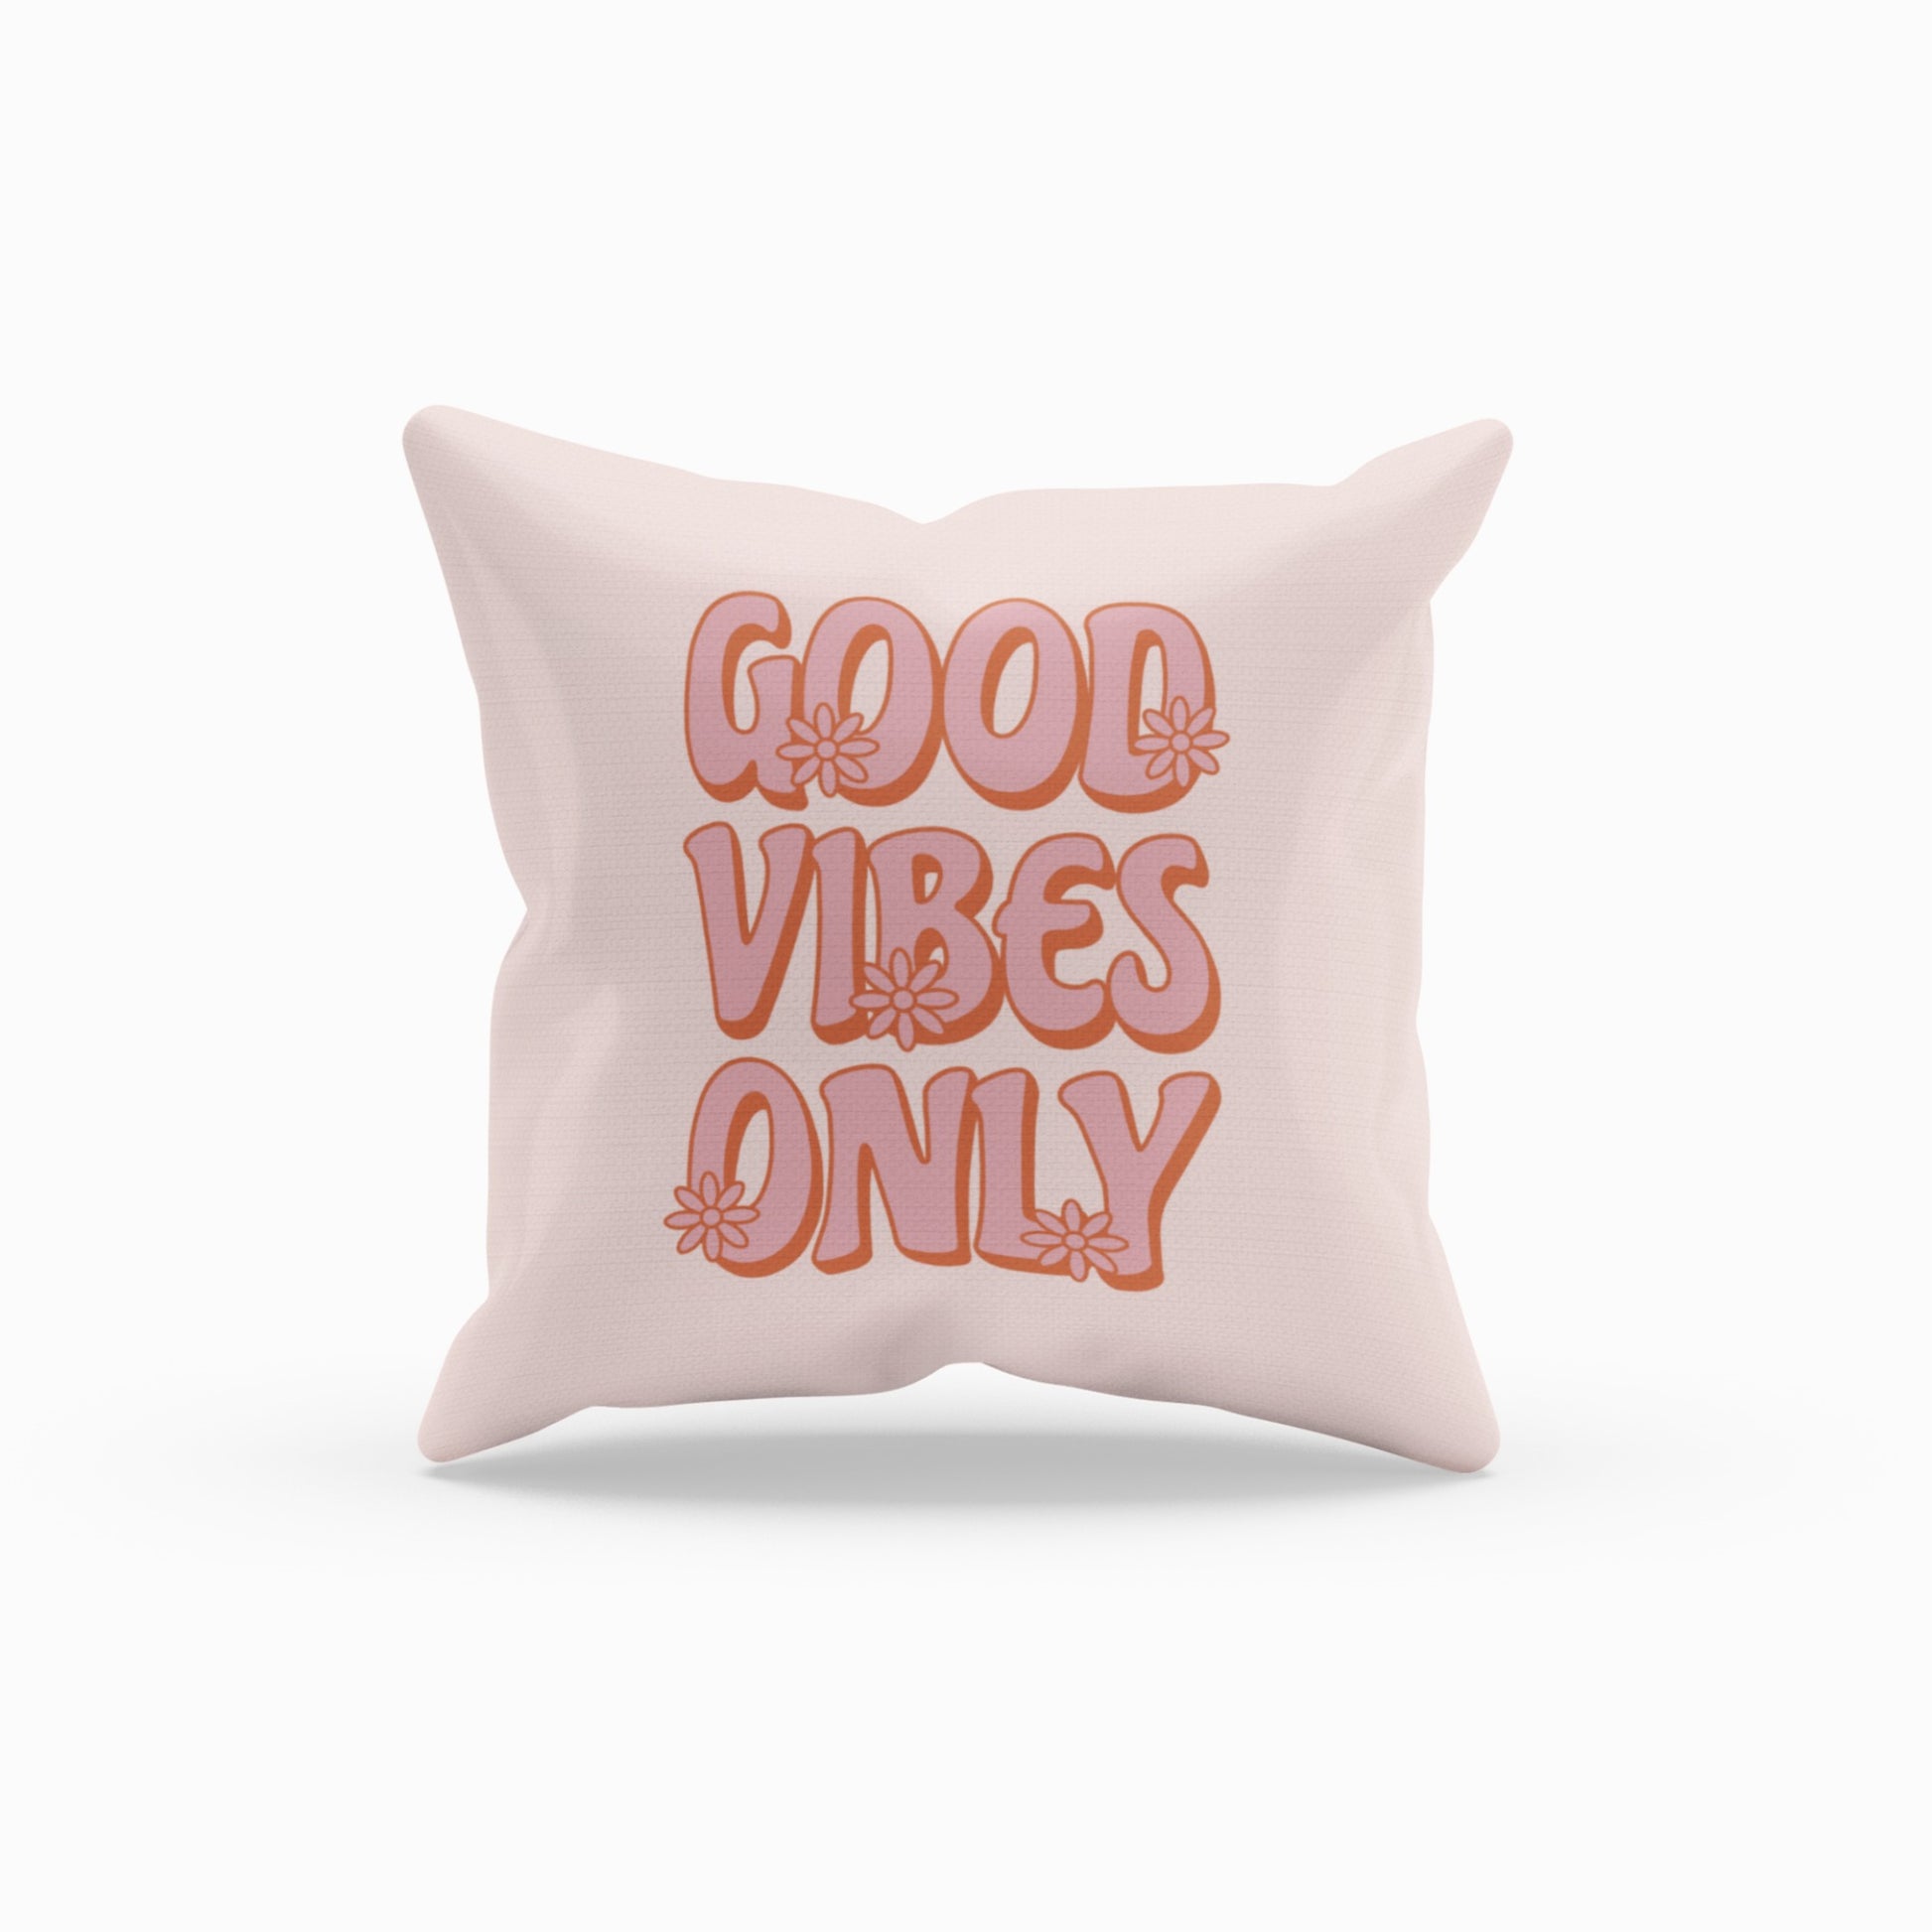 Stylish Printed Throw Pillow with Positive Vibes